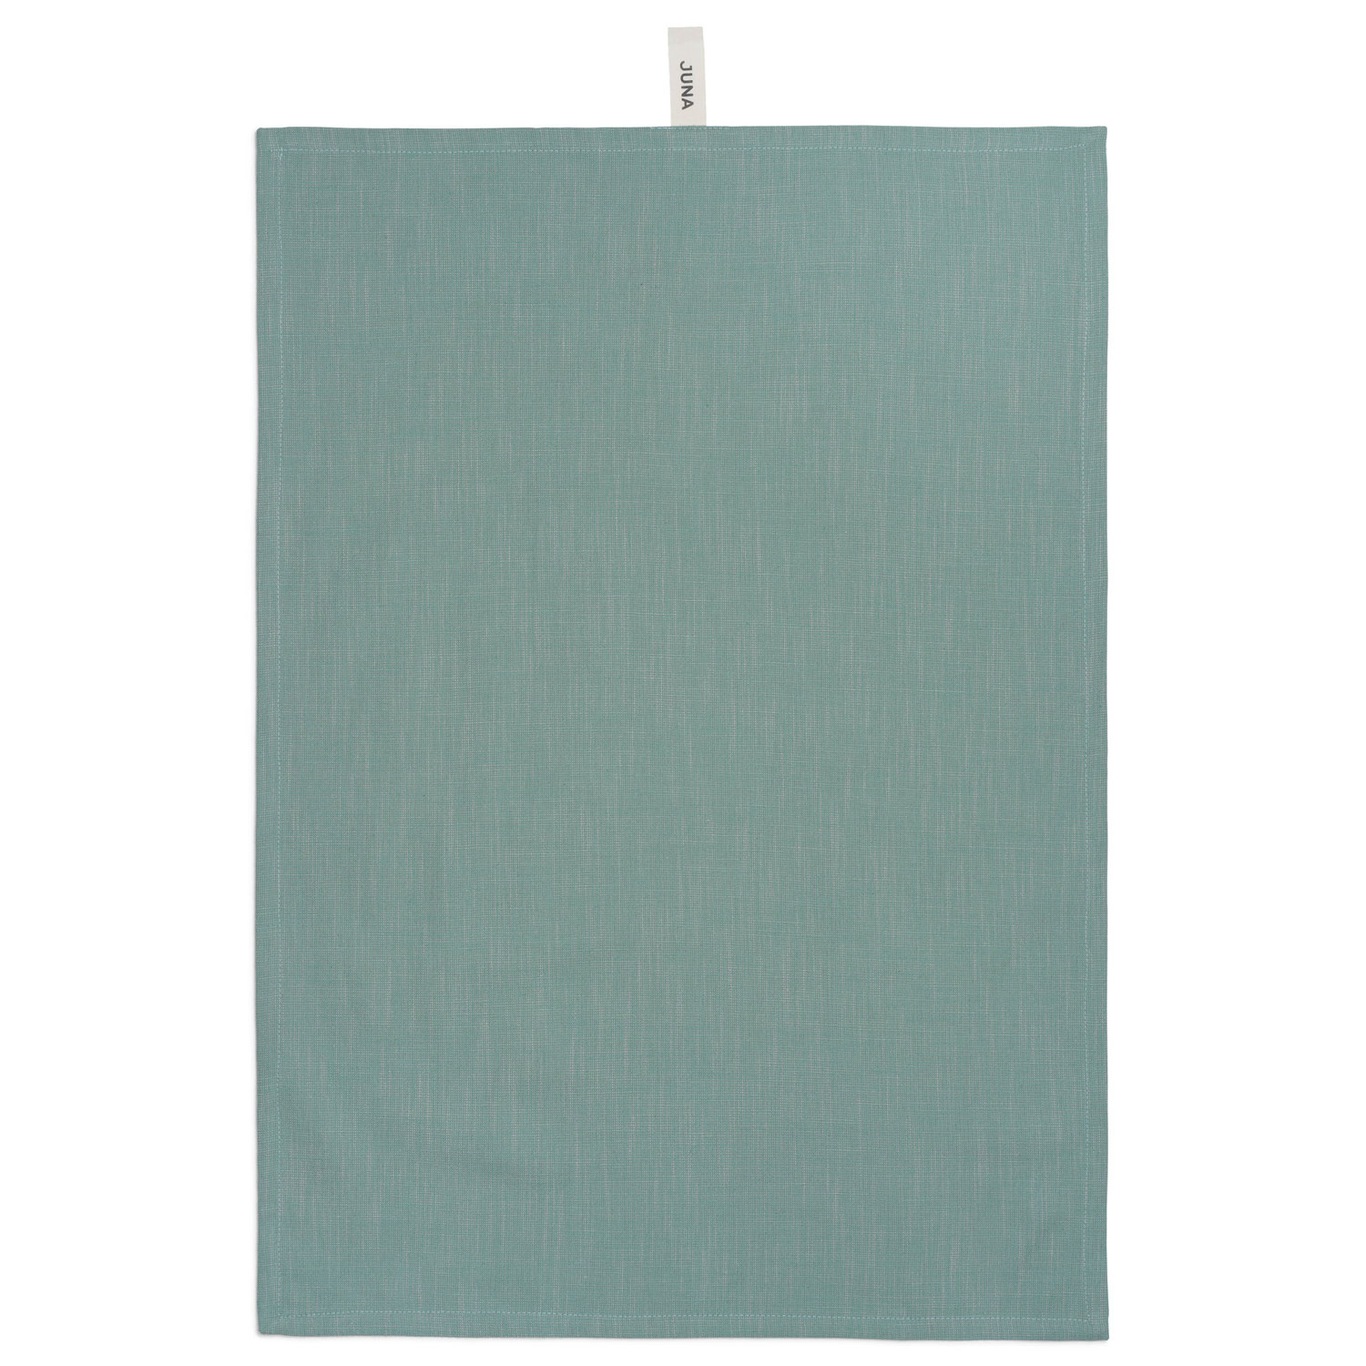 Surface Kitchen Towel 50x70, Turquoise